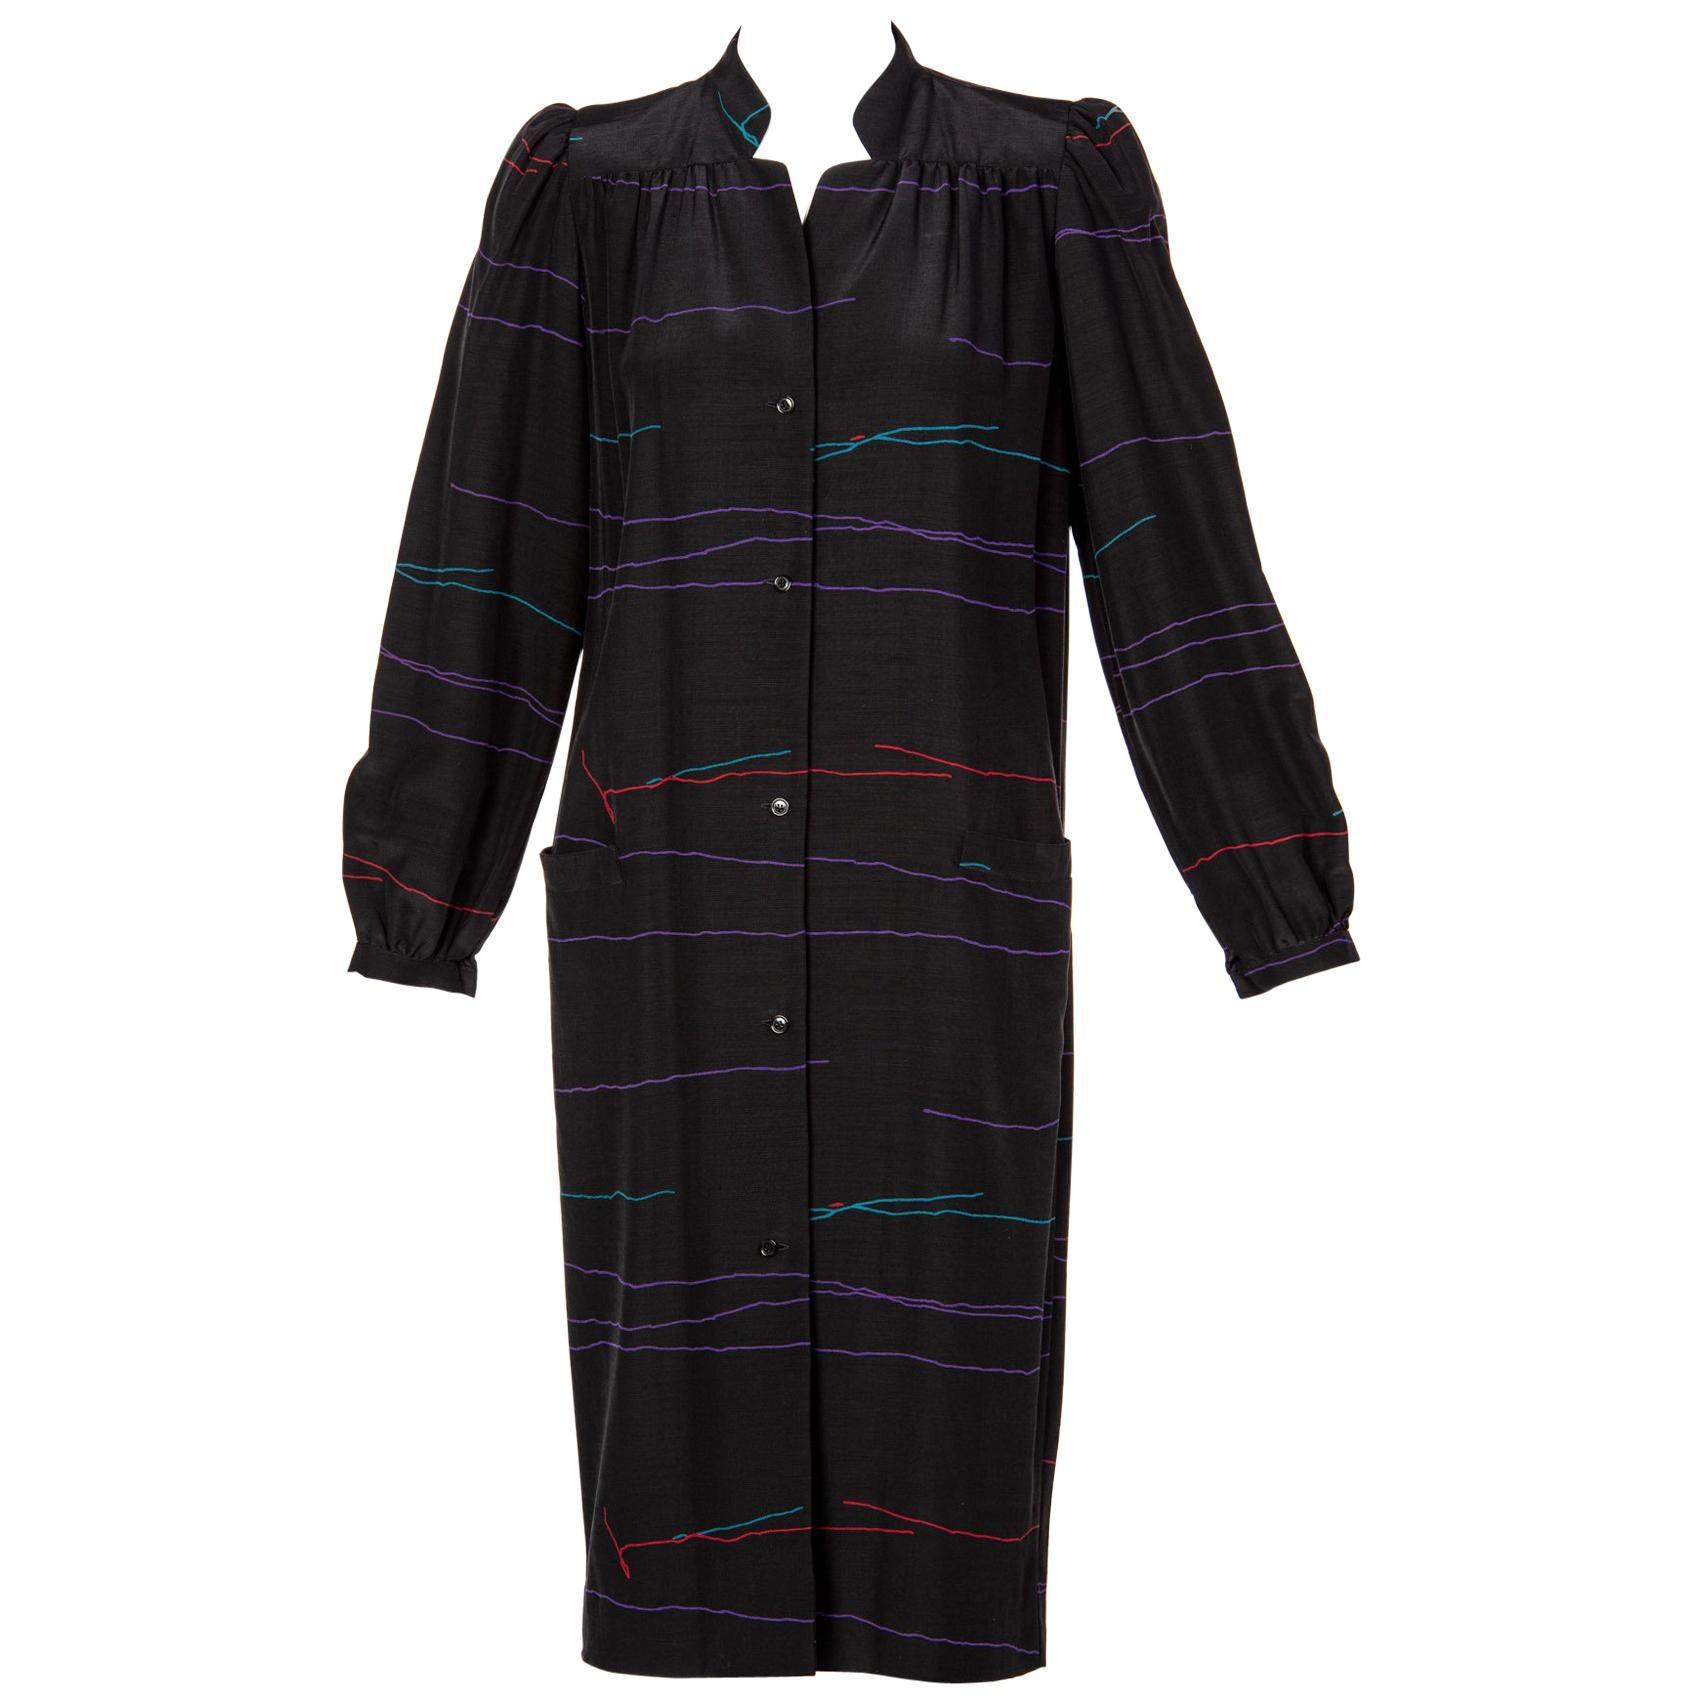 Vintage Halston Black Abstract Striped Silk Dress Coat, 1970s For Sale